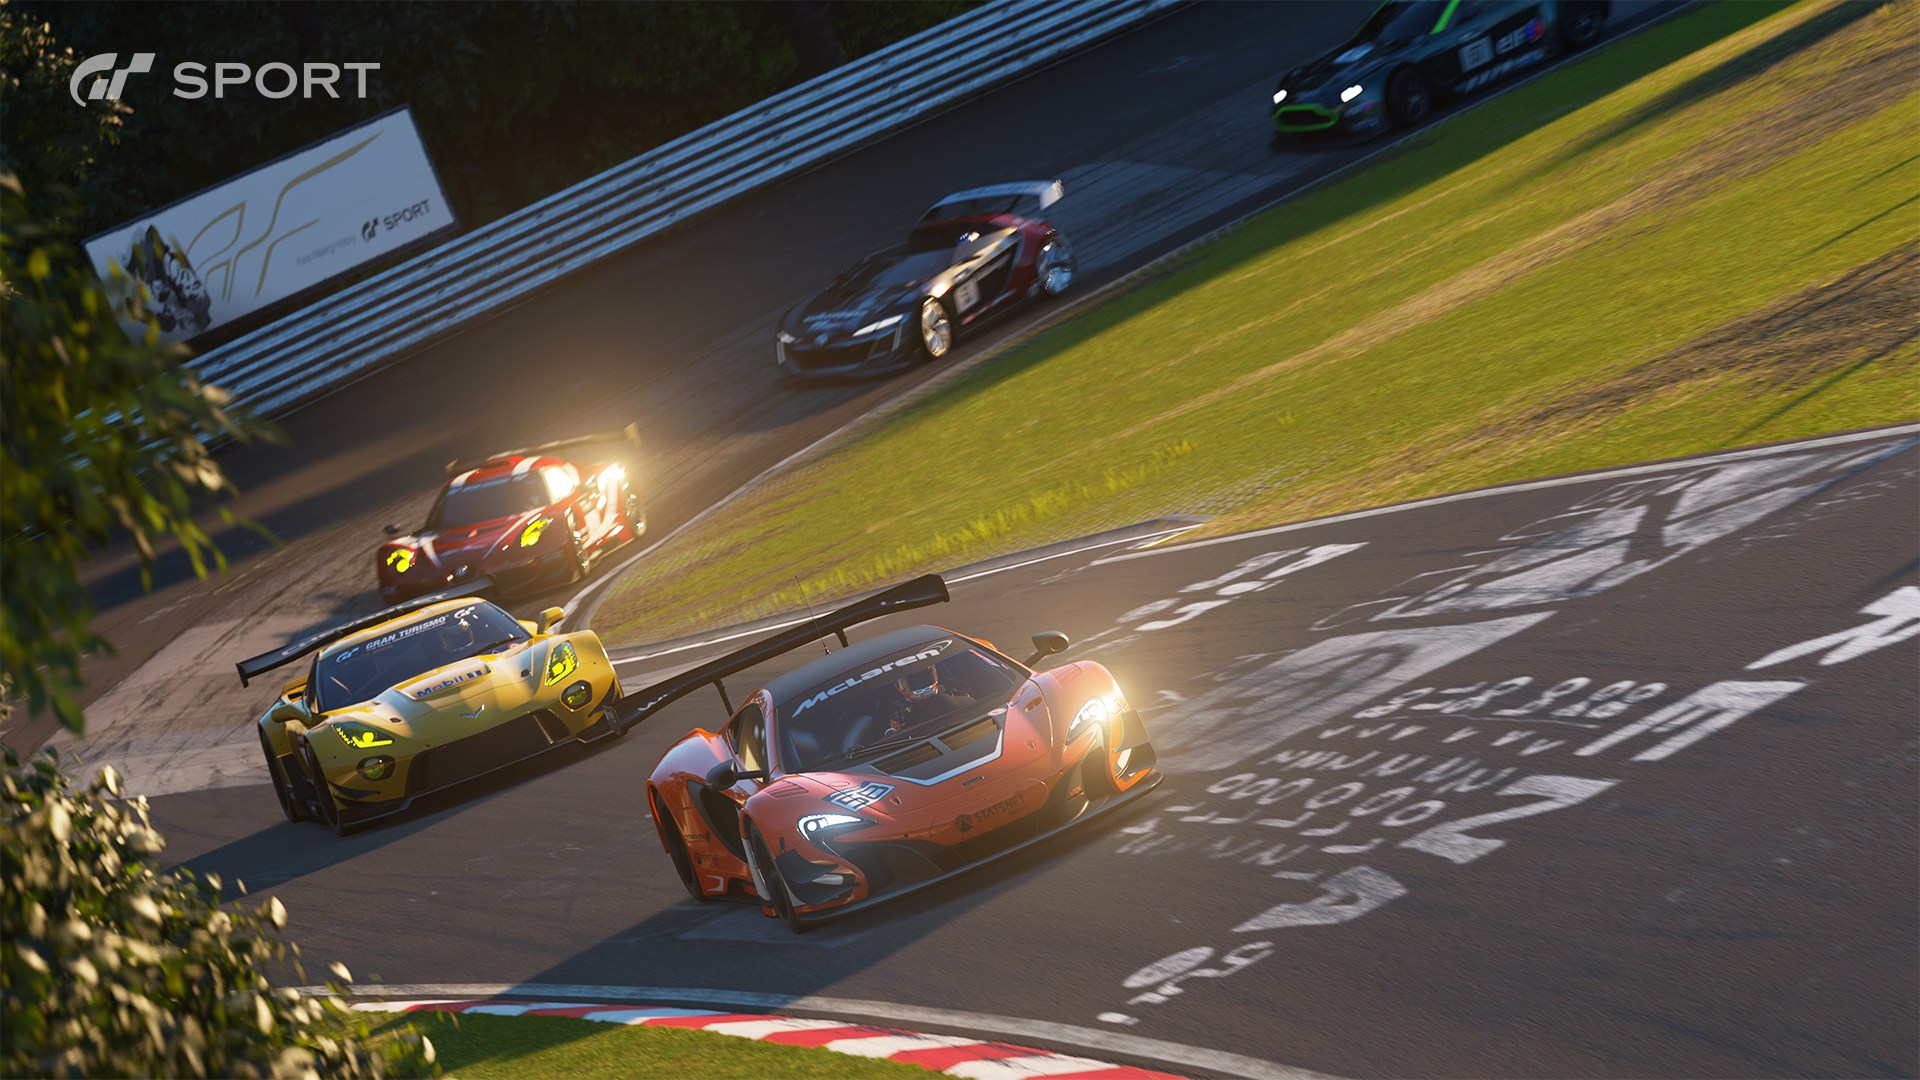 07 Nurburgring Nordschleife 8PM 650S GT3 1498661049 1507910123